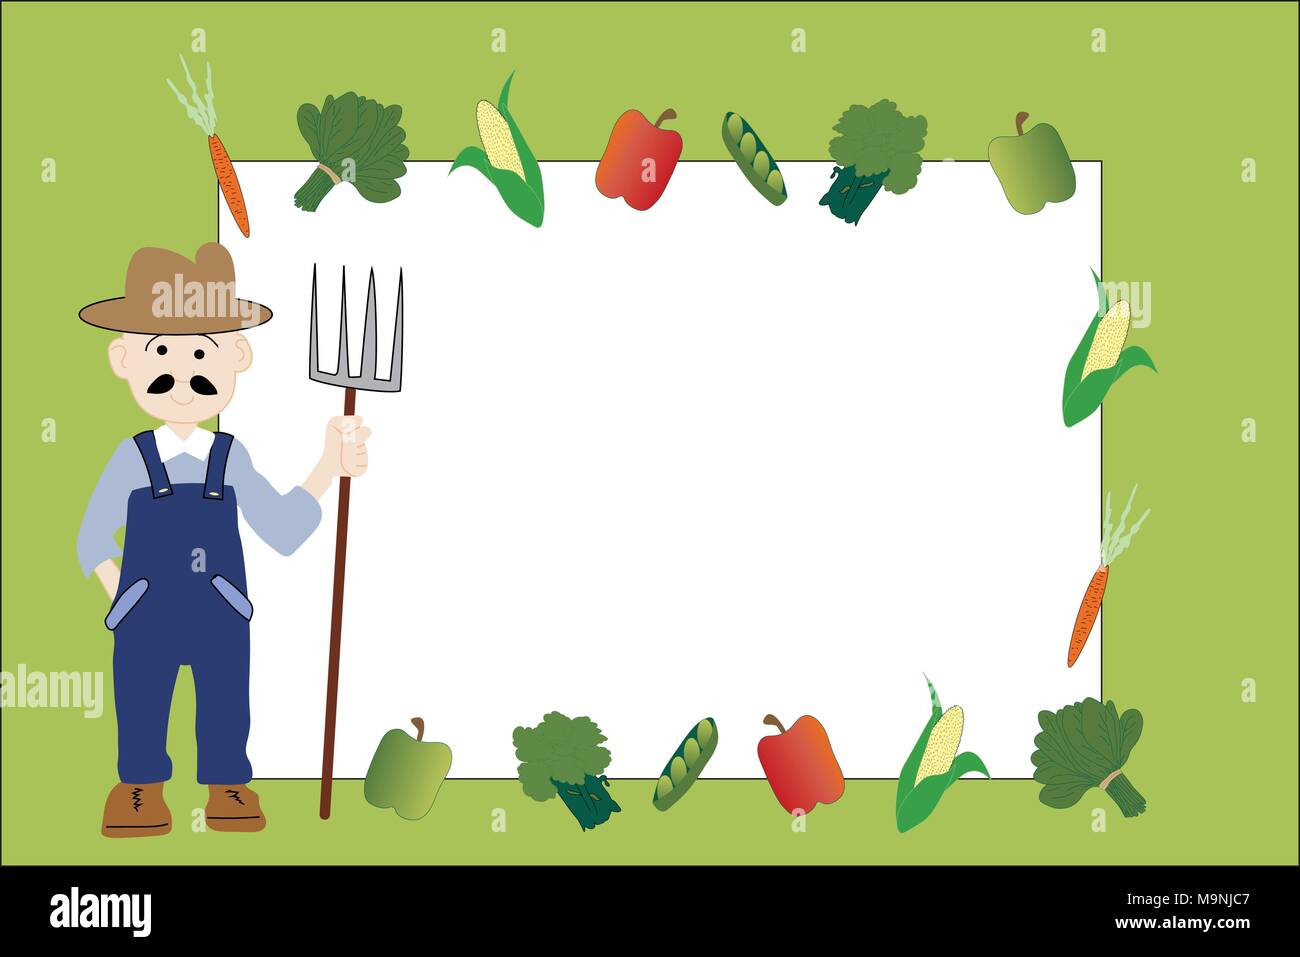 Illustrated farmer in coveralls holding pitchfork standing next to white copy space frame bordered by colorful vegetables on green background. Stock Vector